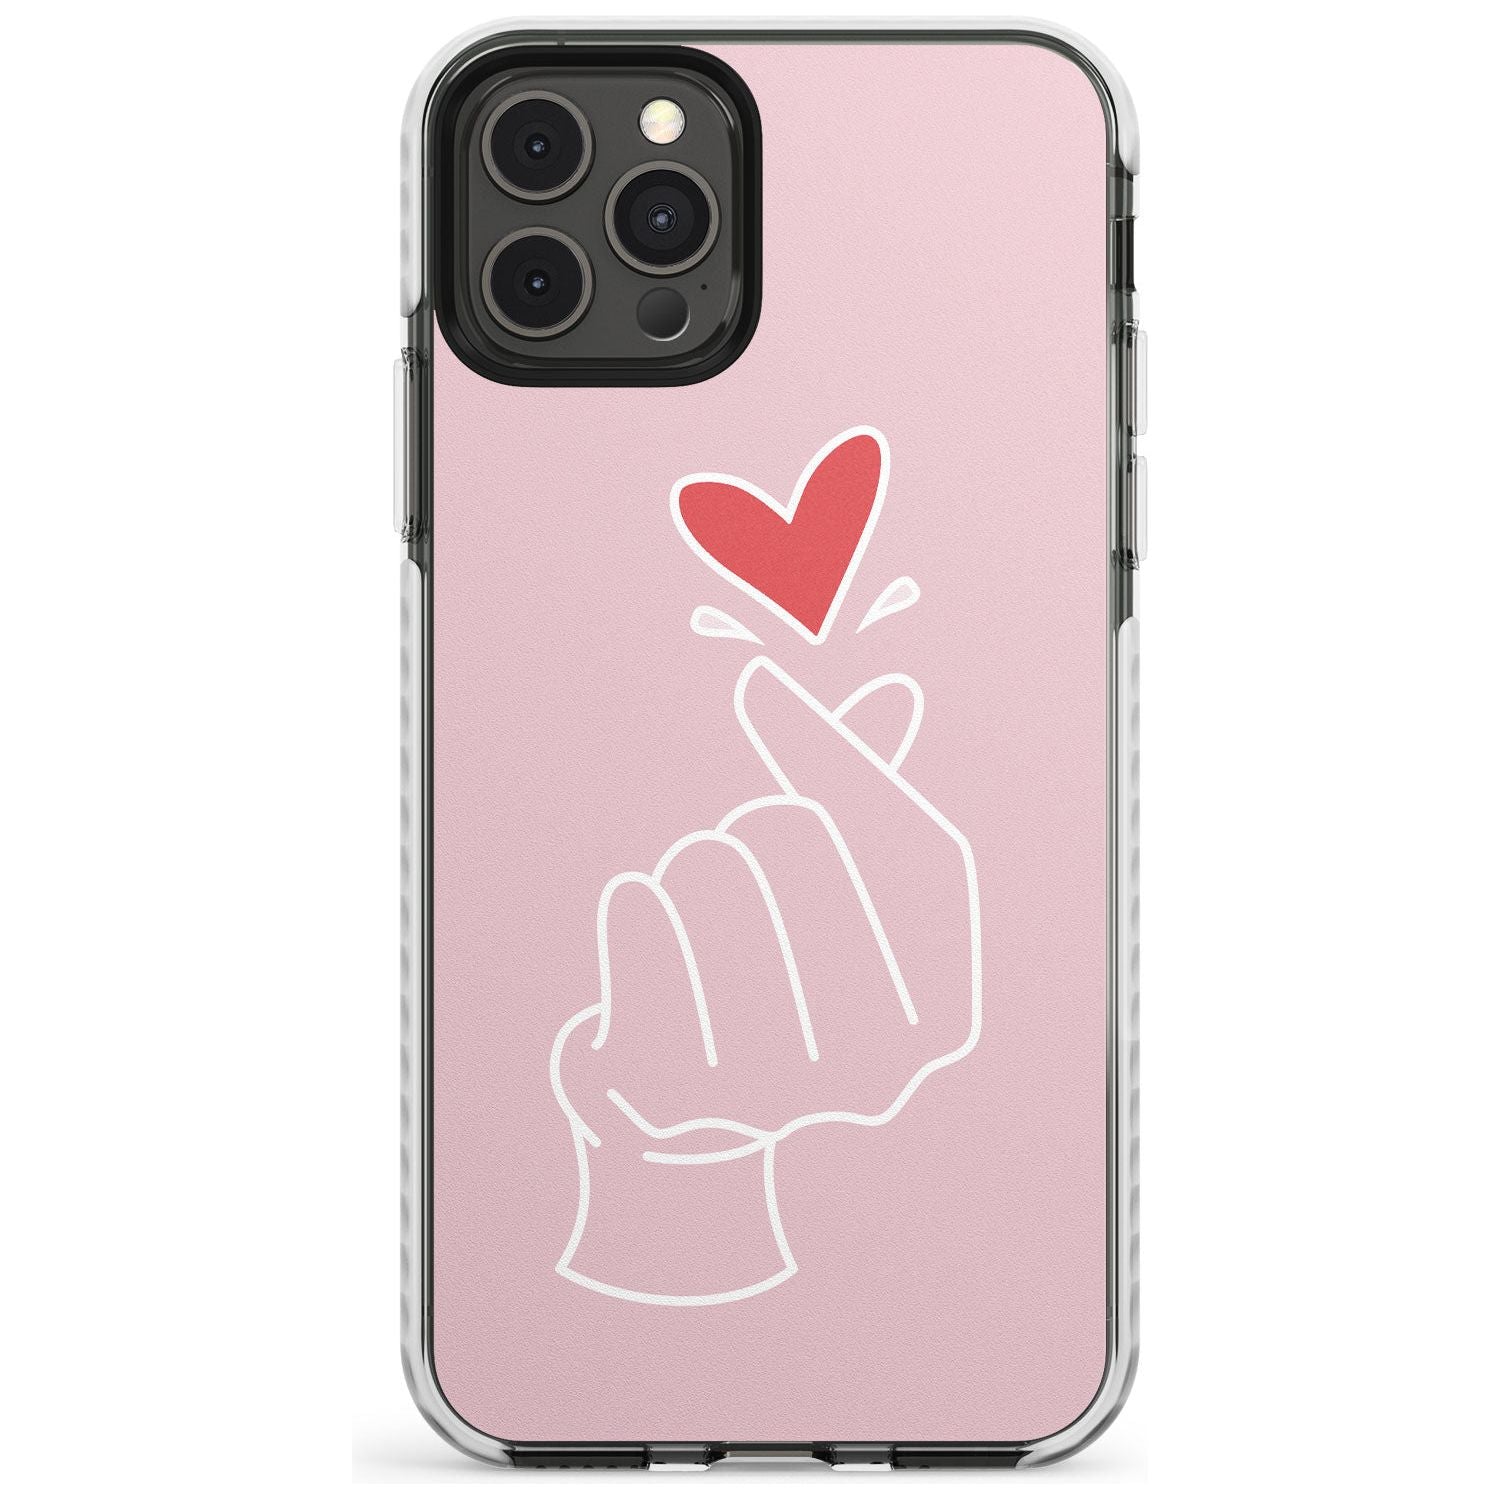 Finger Heart in Pink Slim TPU Phone Case for iPhone 11 Pro Max